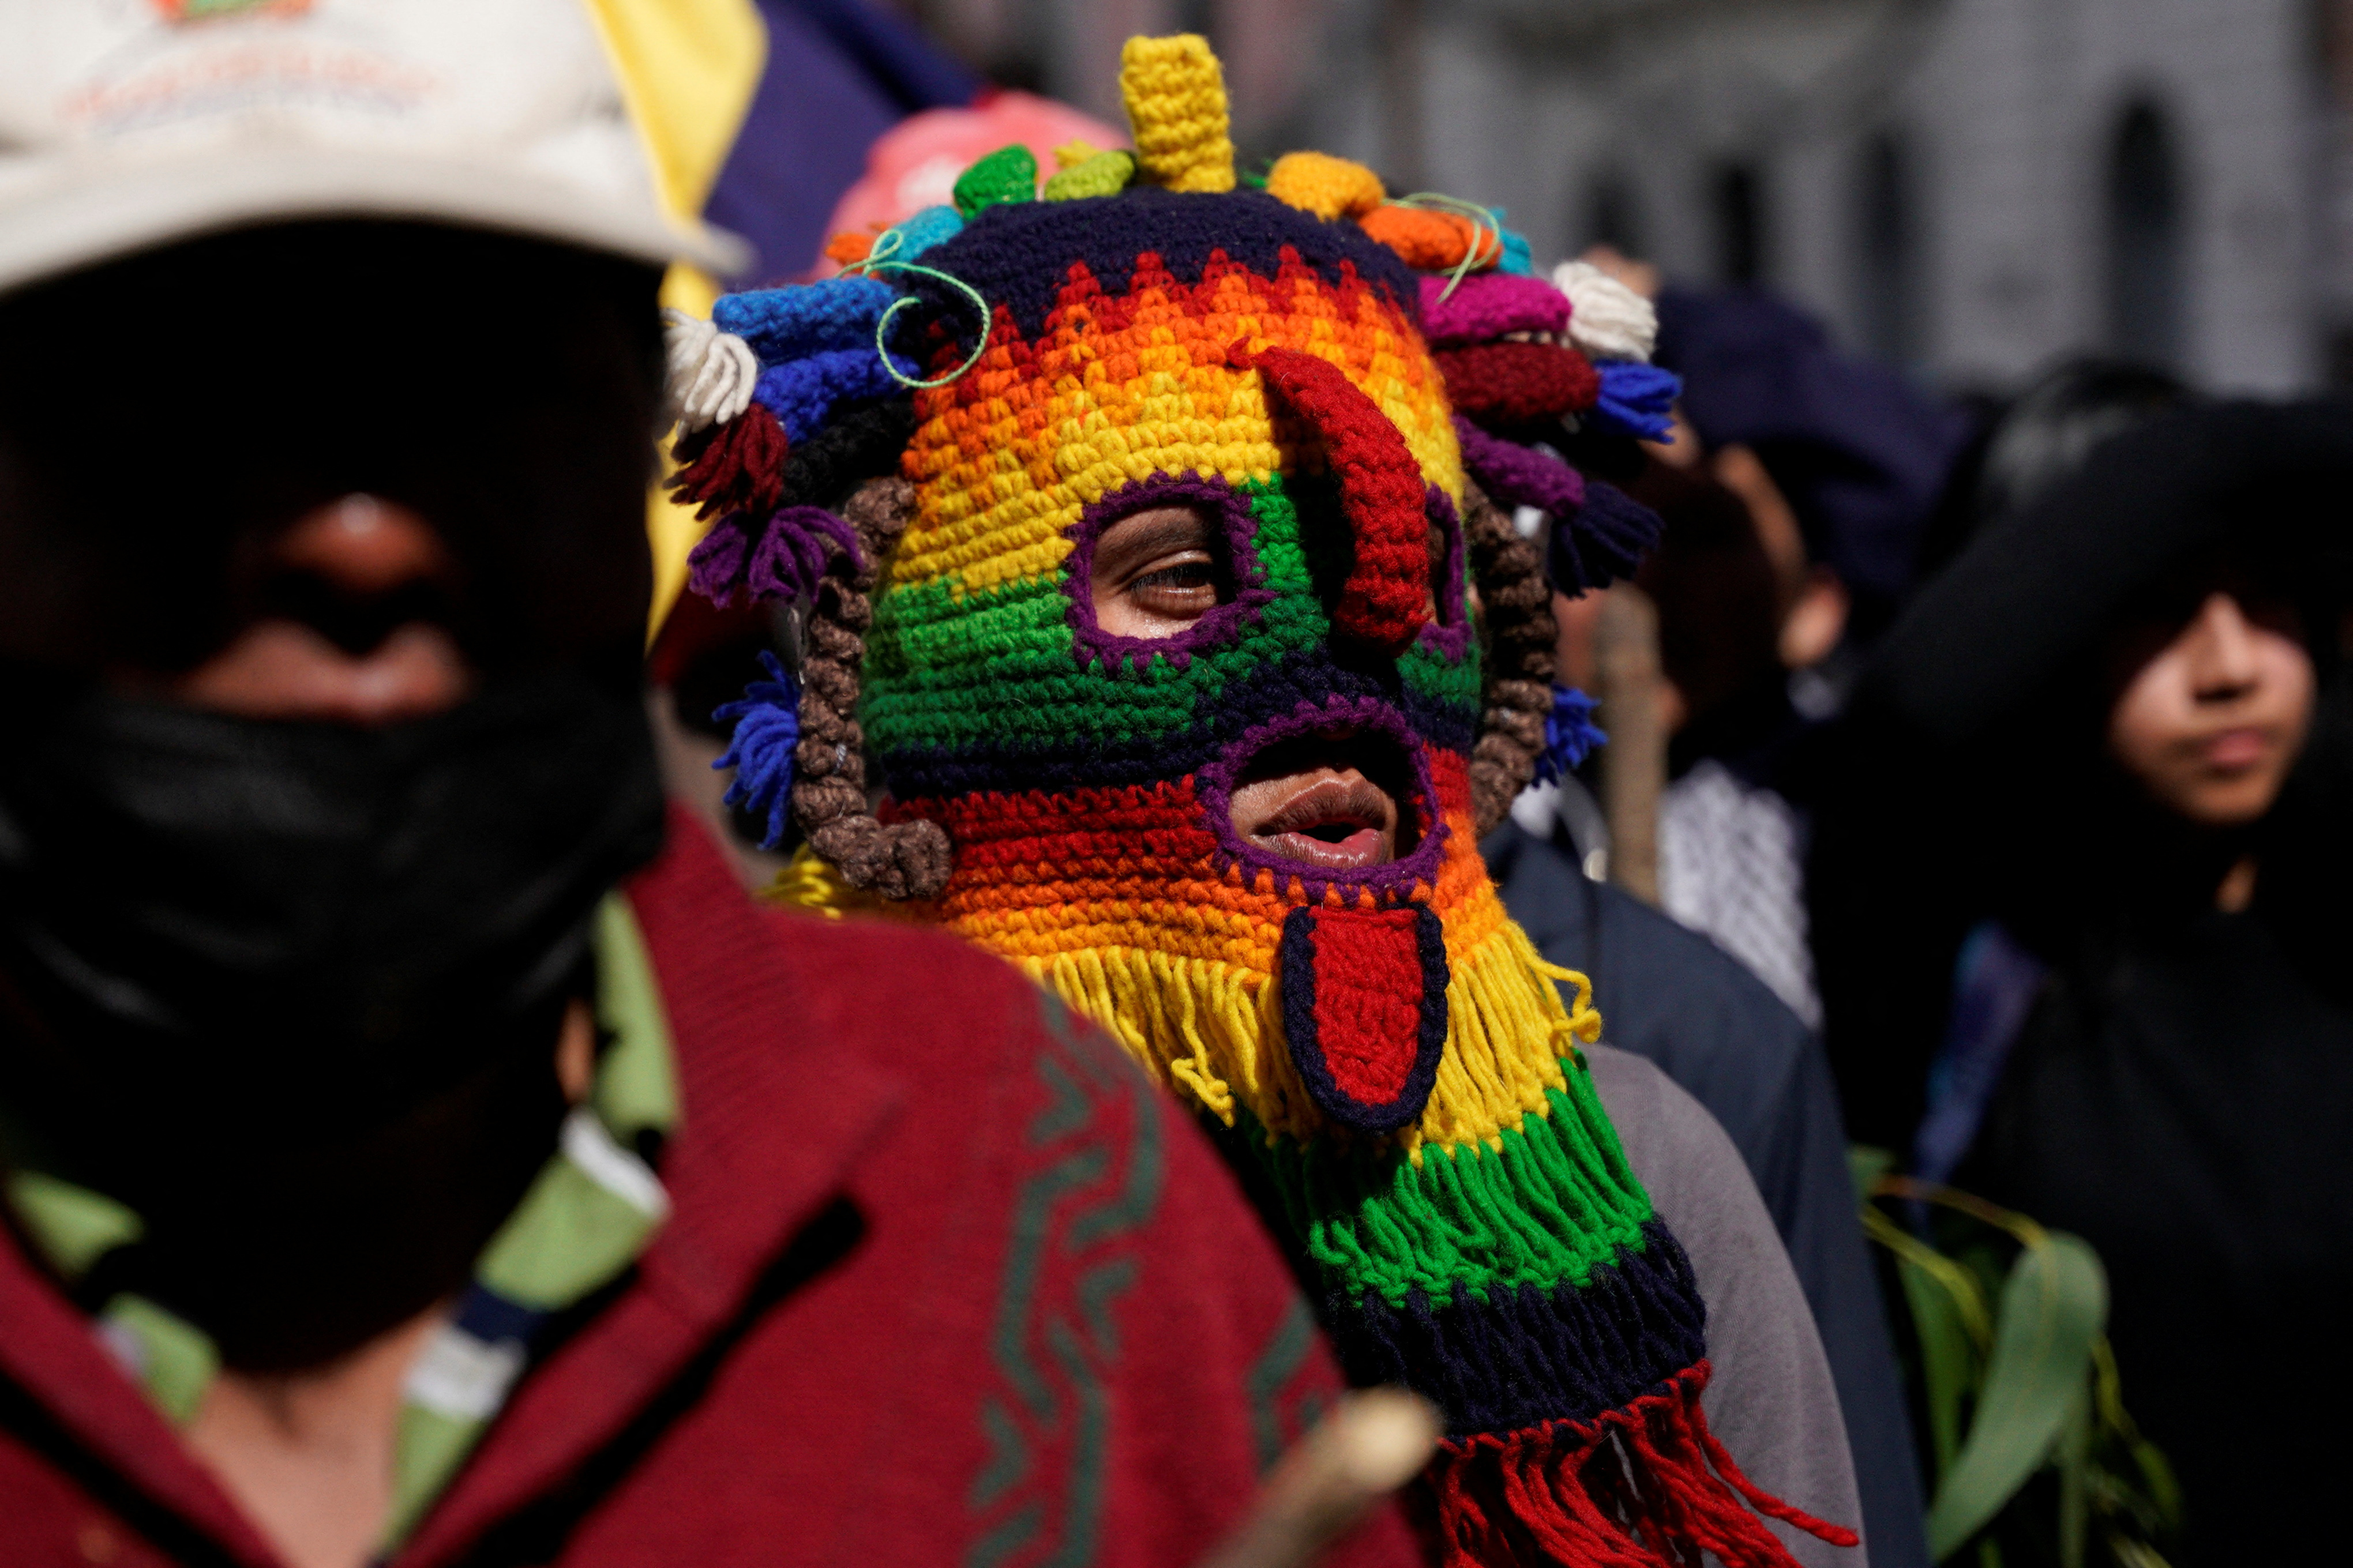 Indigenous protesters march in Quito after night of Ecuador protest violence